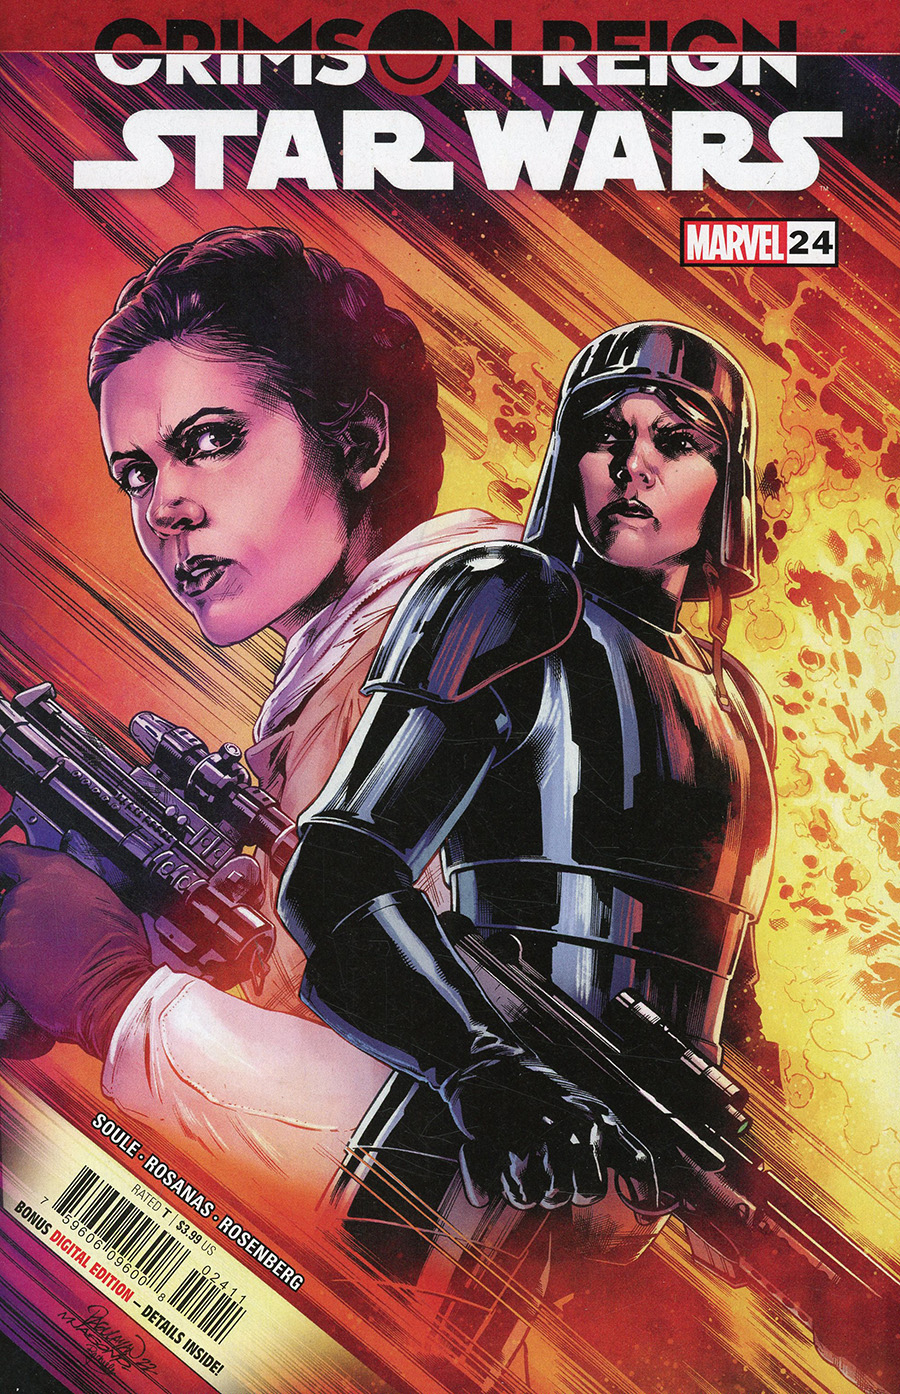 Star Wars Vol 5 #24 Cover A Regular Carlo Pagulayan Cover